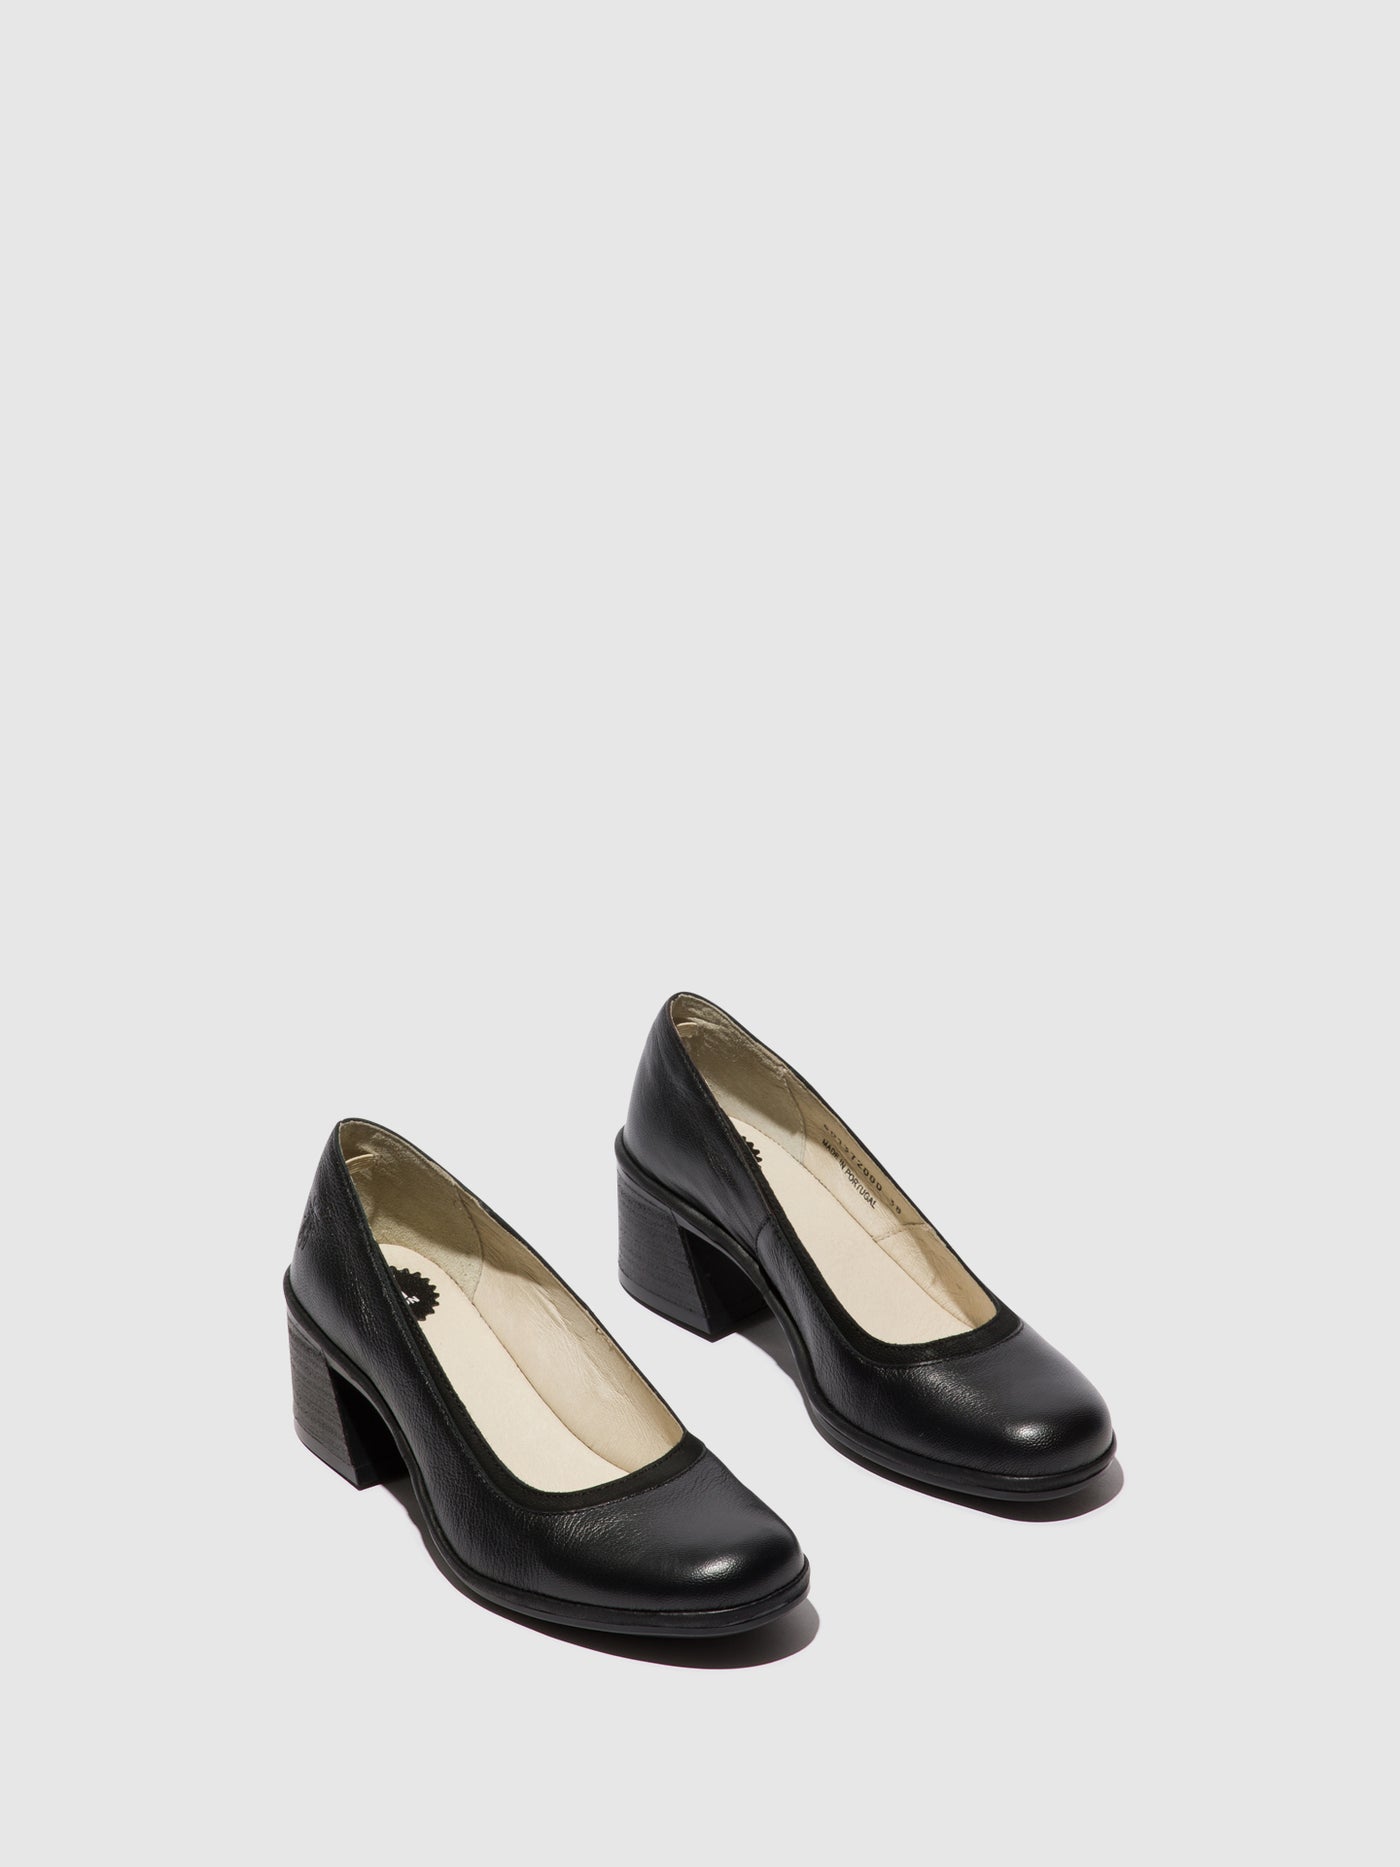 Classic Pumps Shoes LADE372FLY BLACK